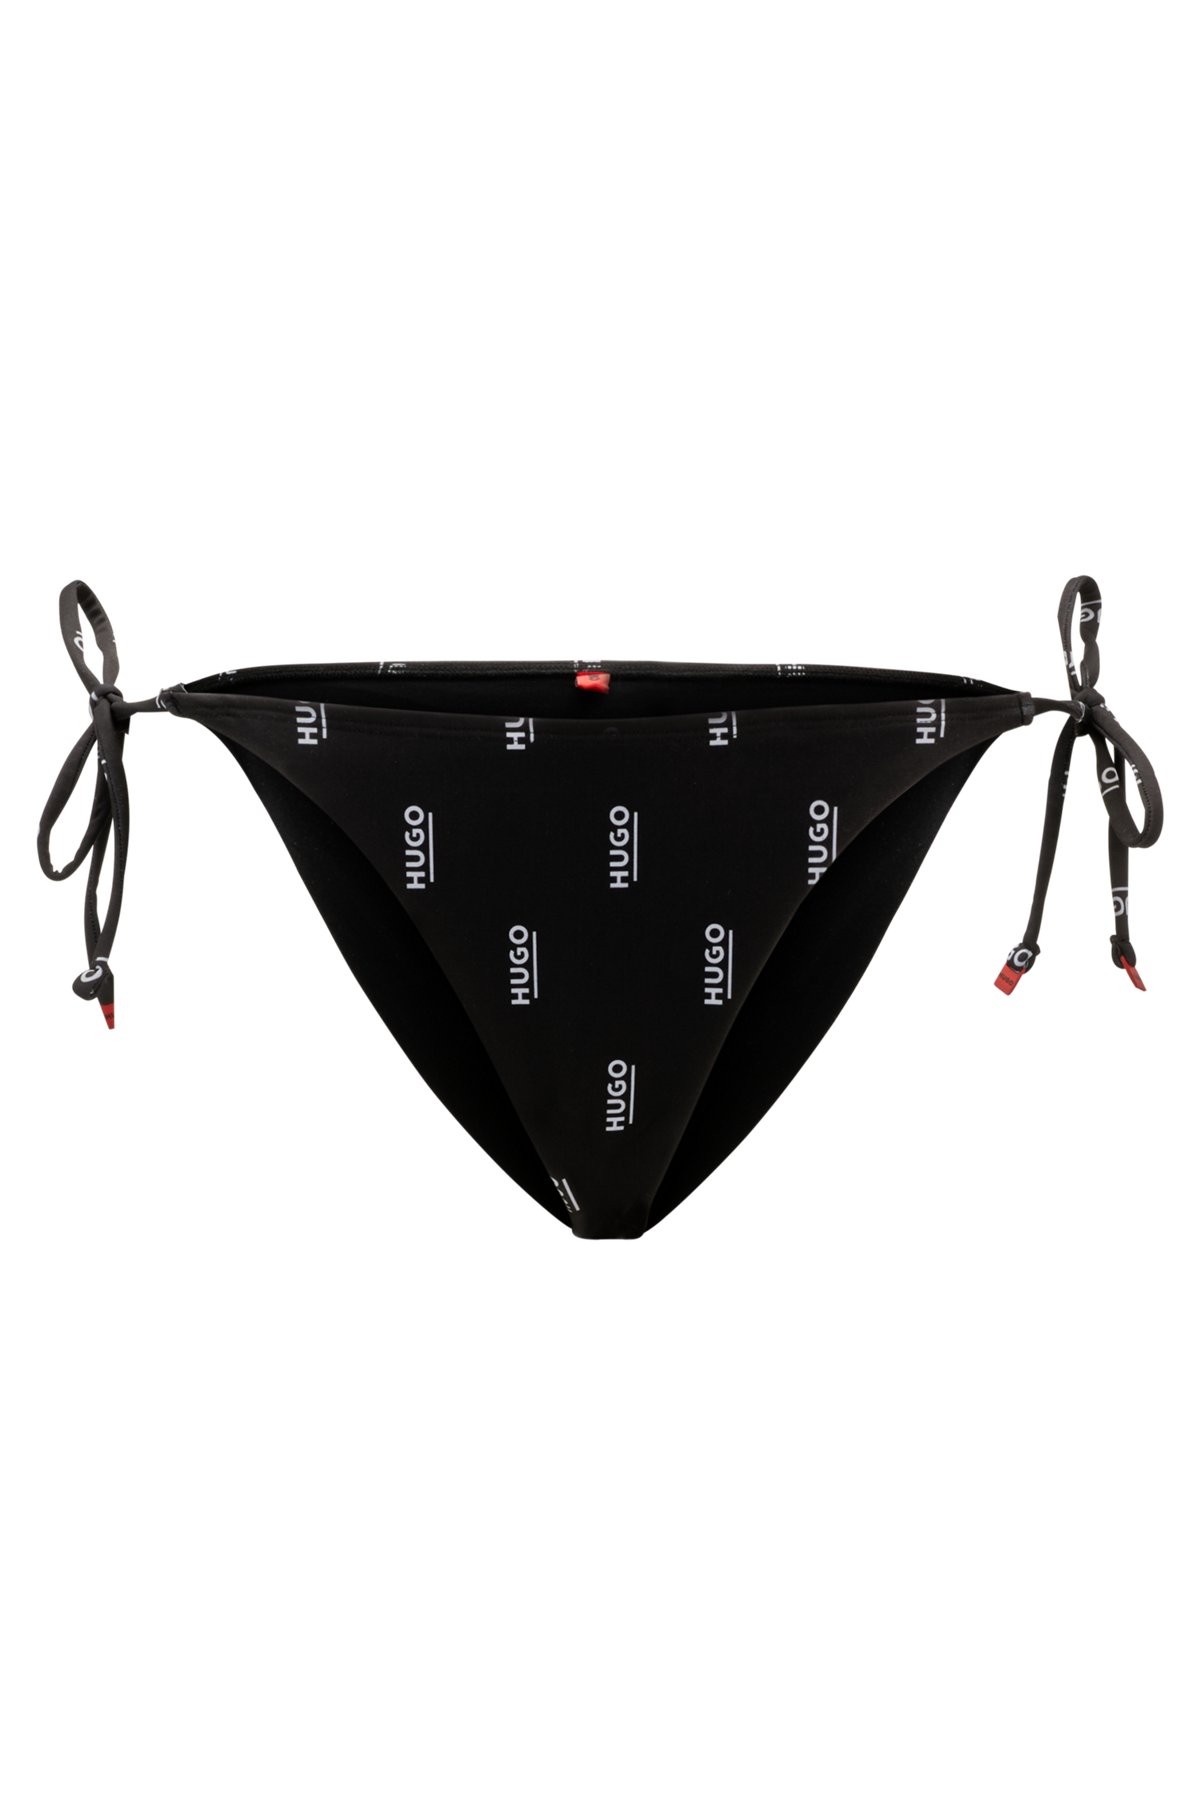 Quick-dry tie-side bikini bottoms with logo print, Black Patterned